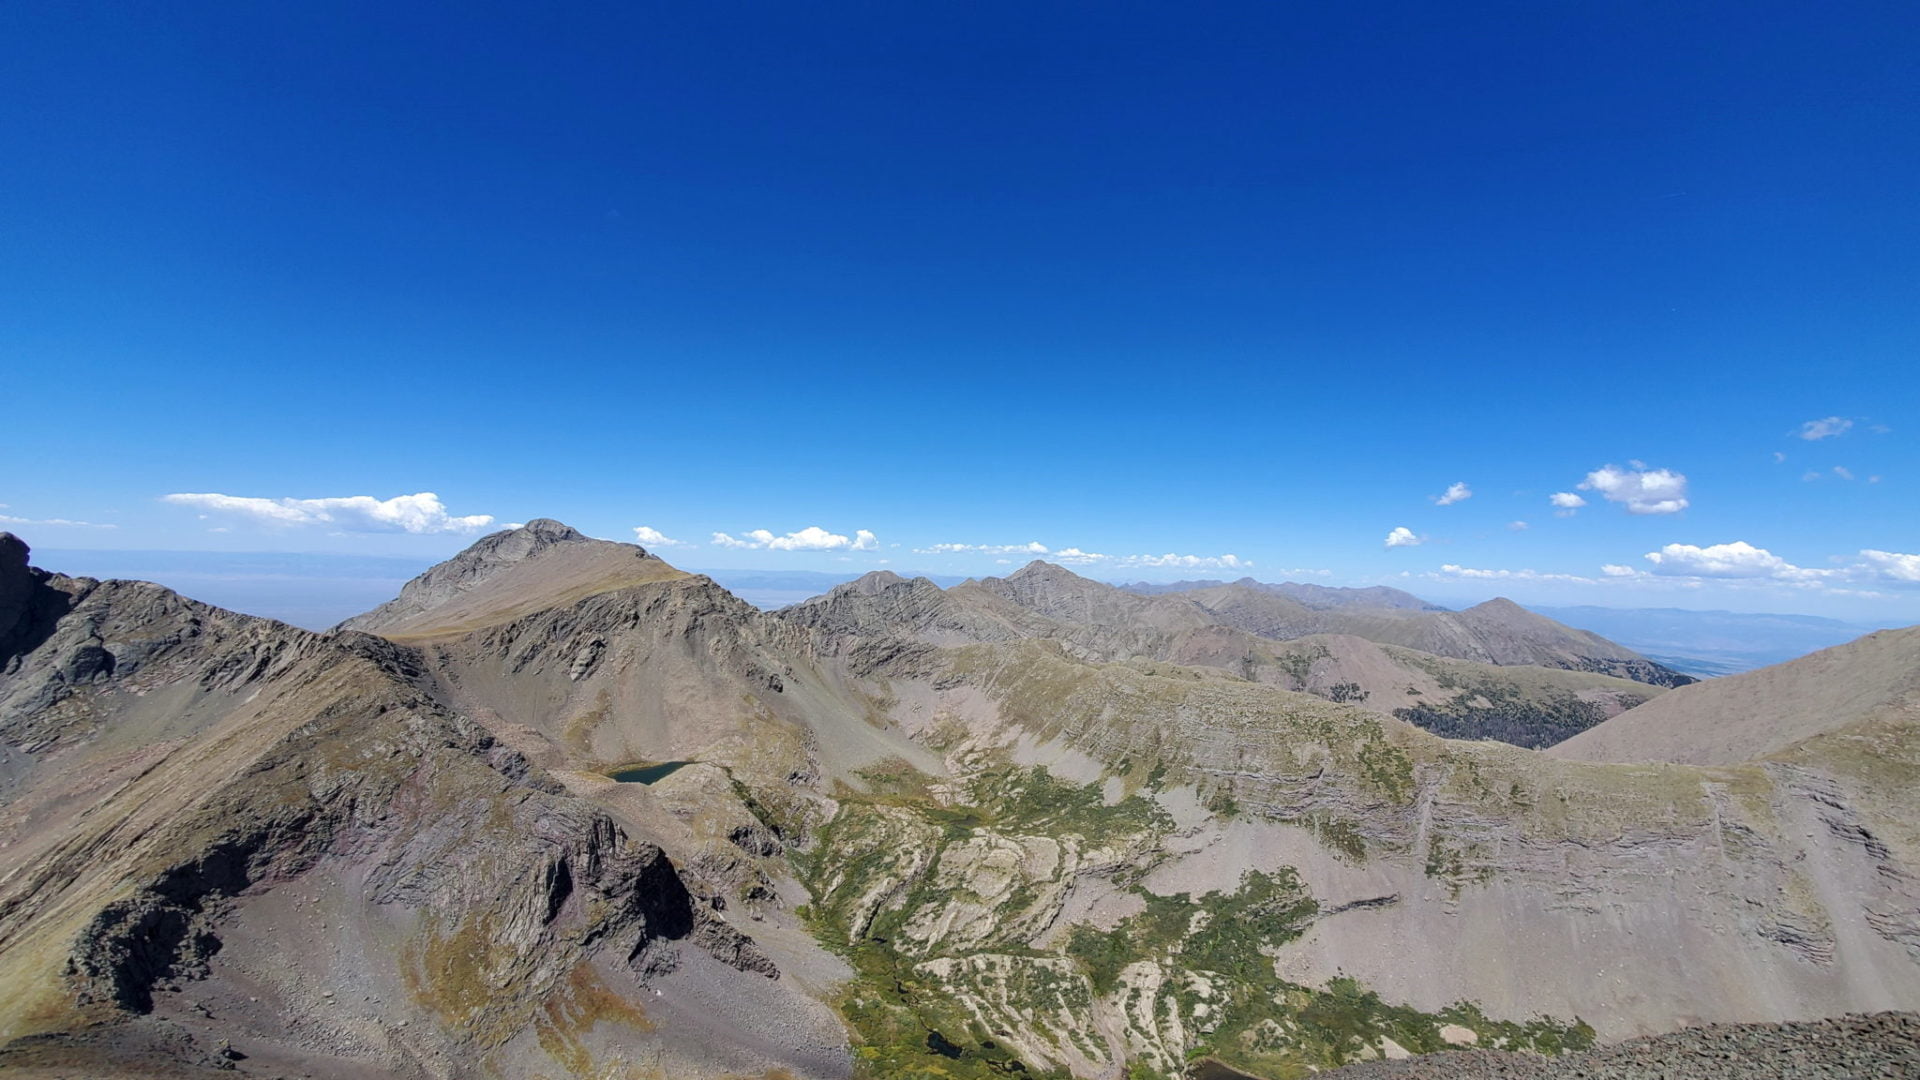 Columbia and Challenger, two 14ers) to the left (near center)